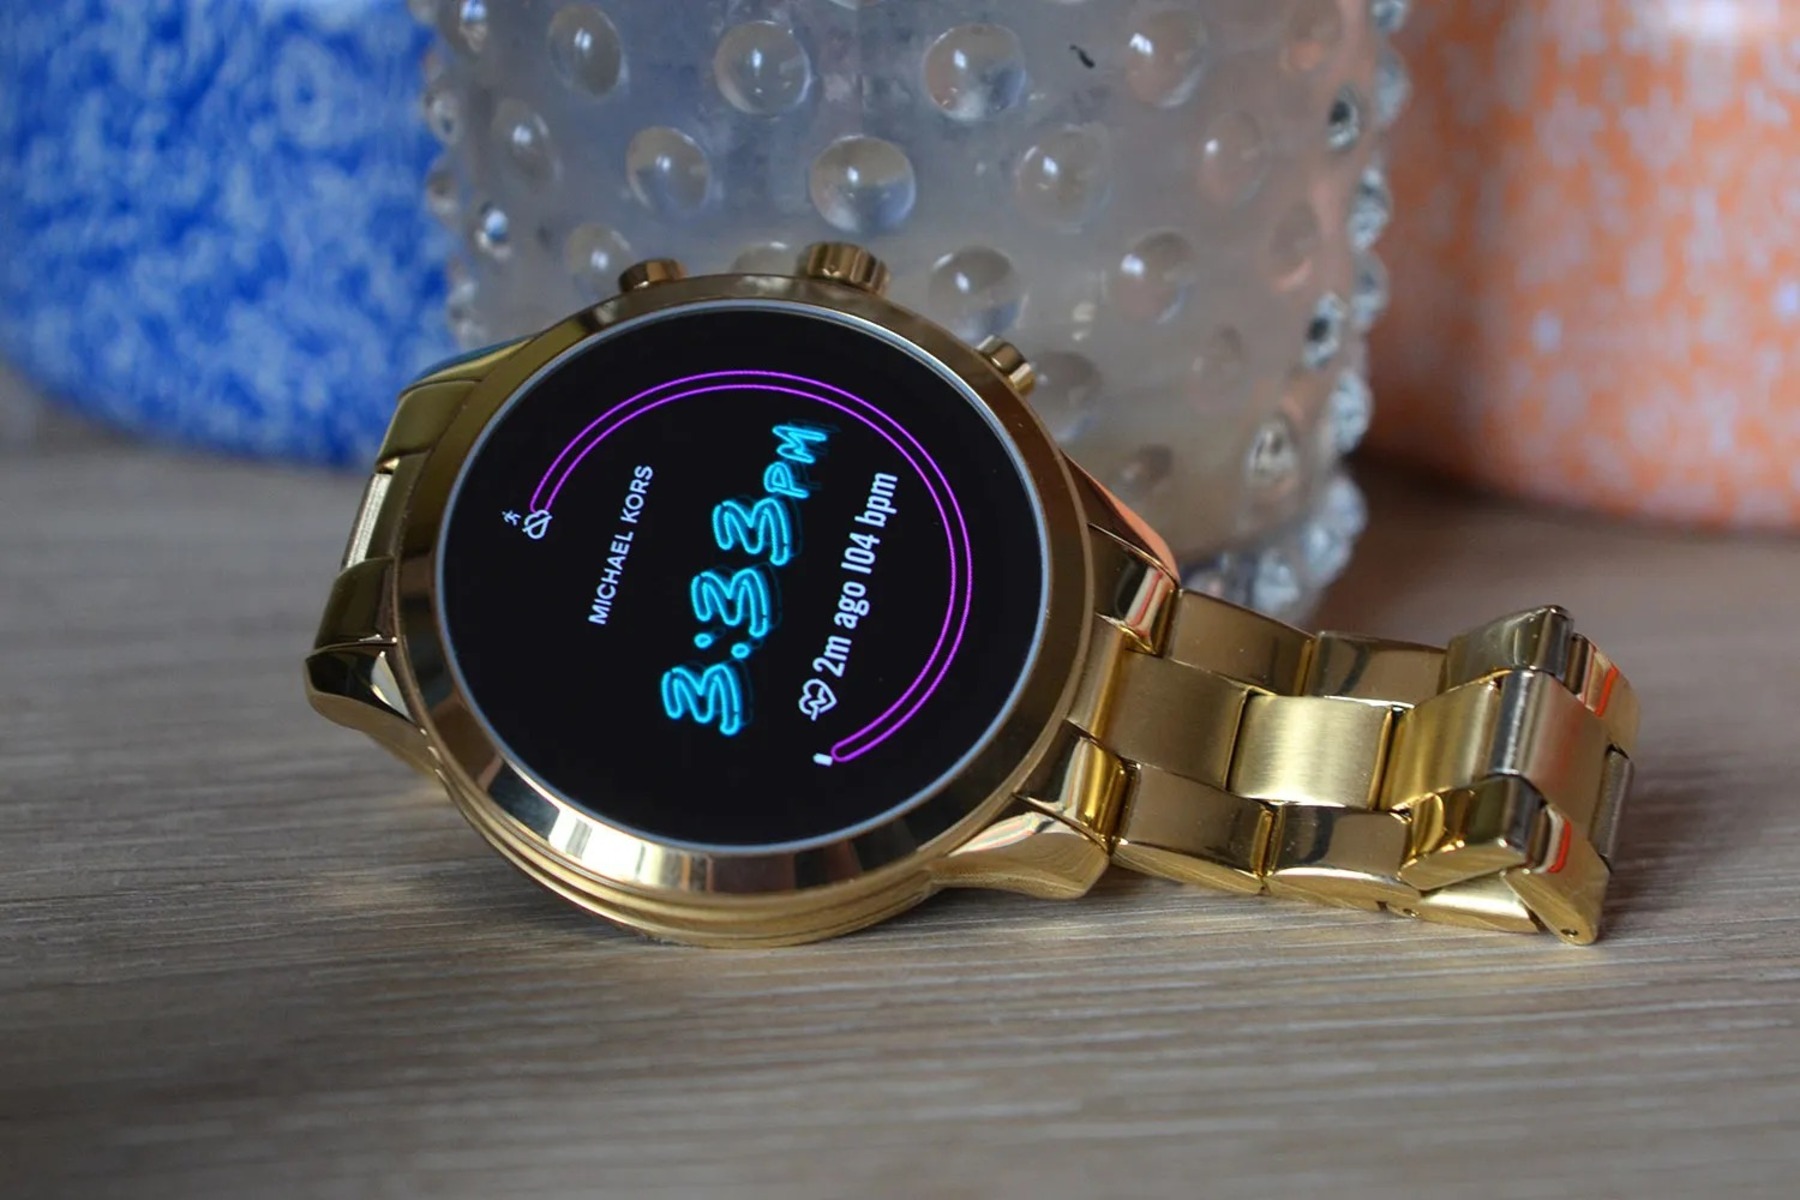 Step-by-Step: Resetting Michael Kors Smartwatch